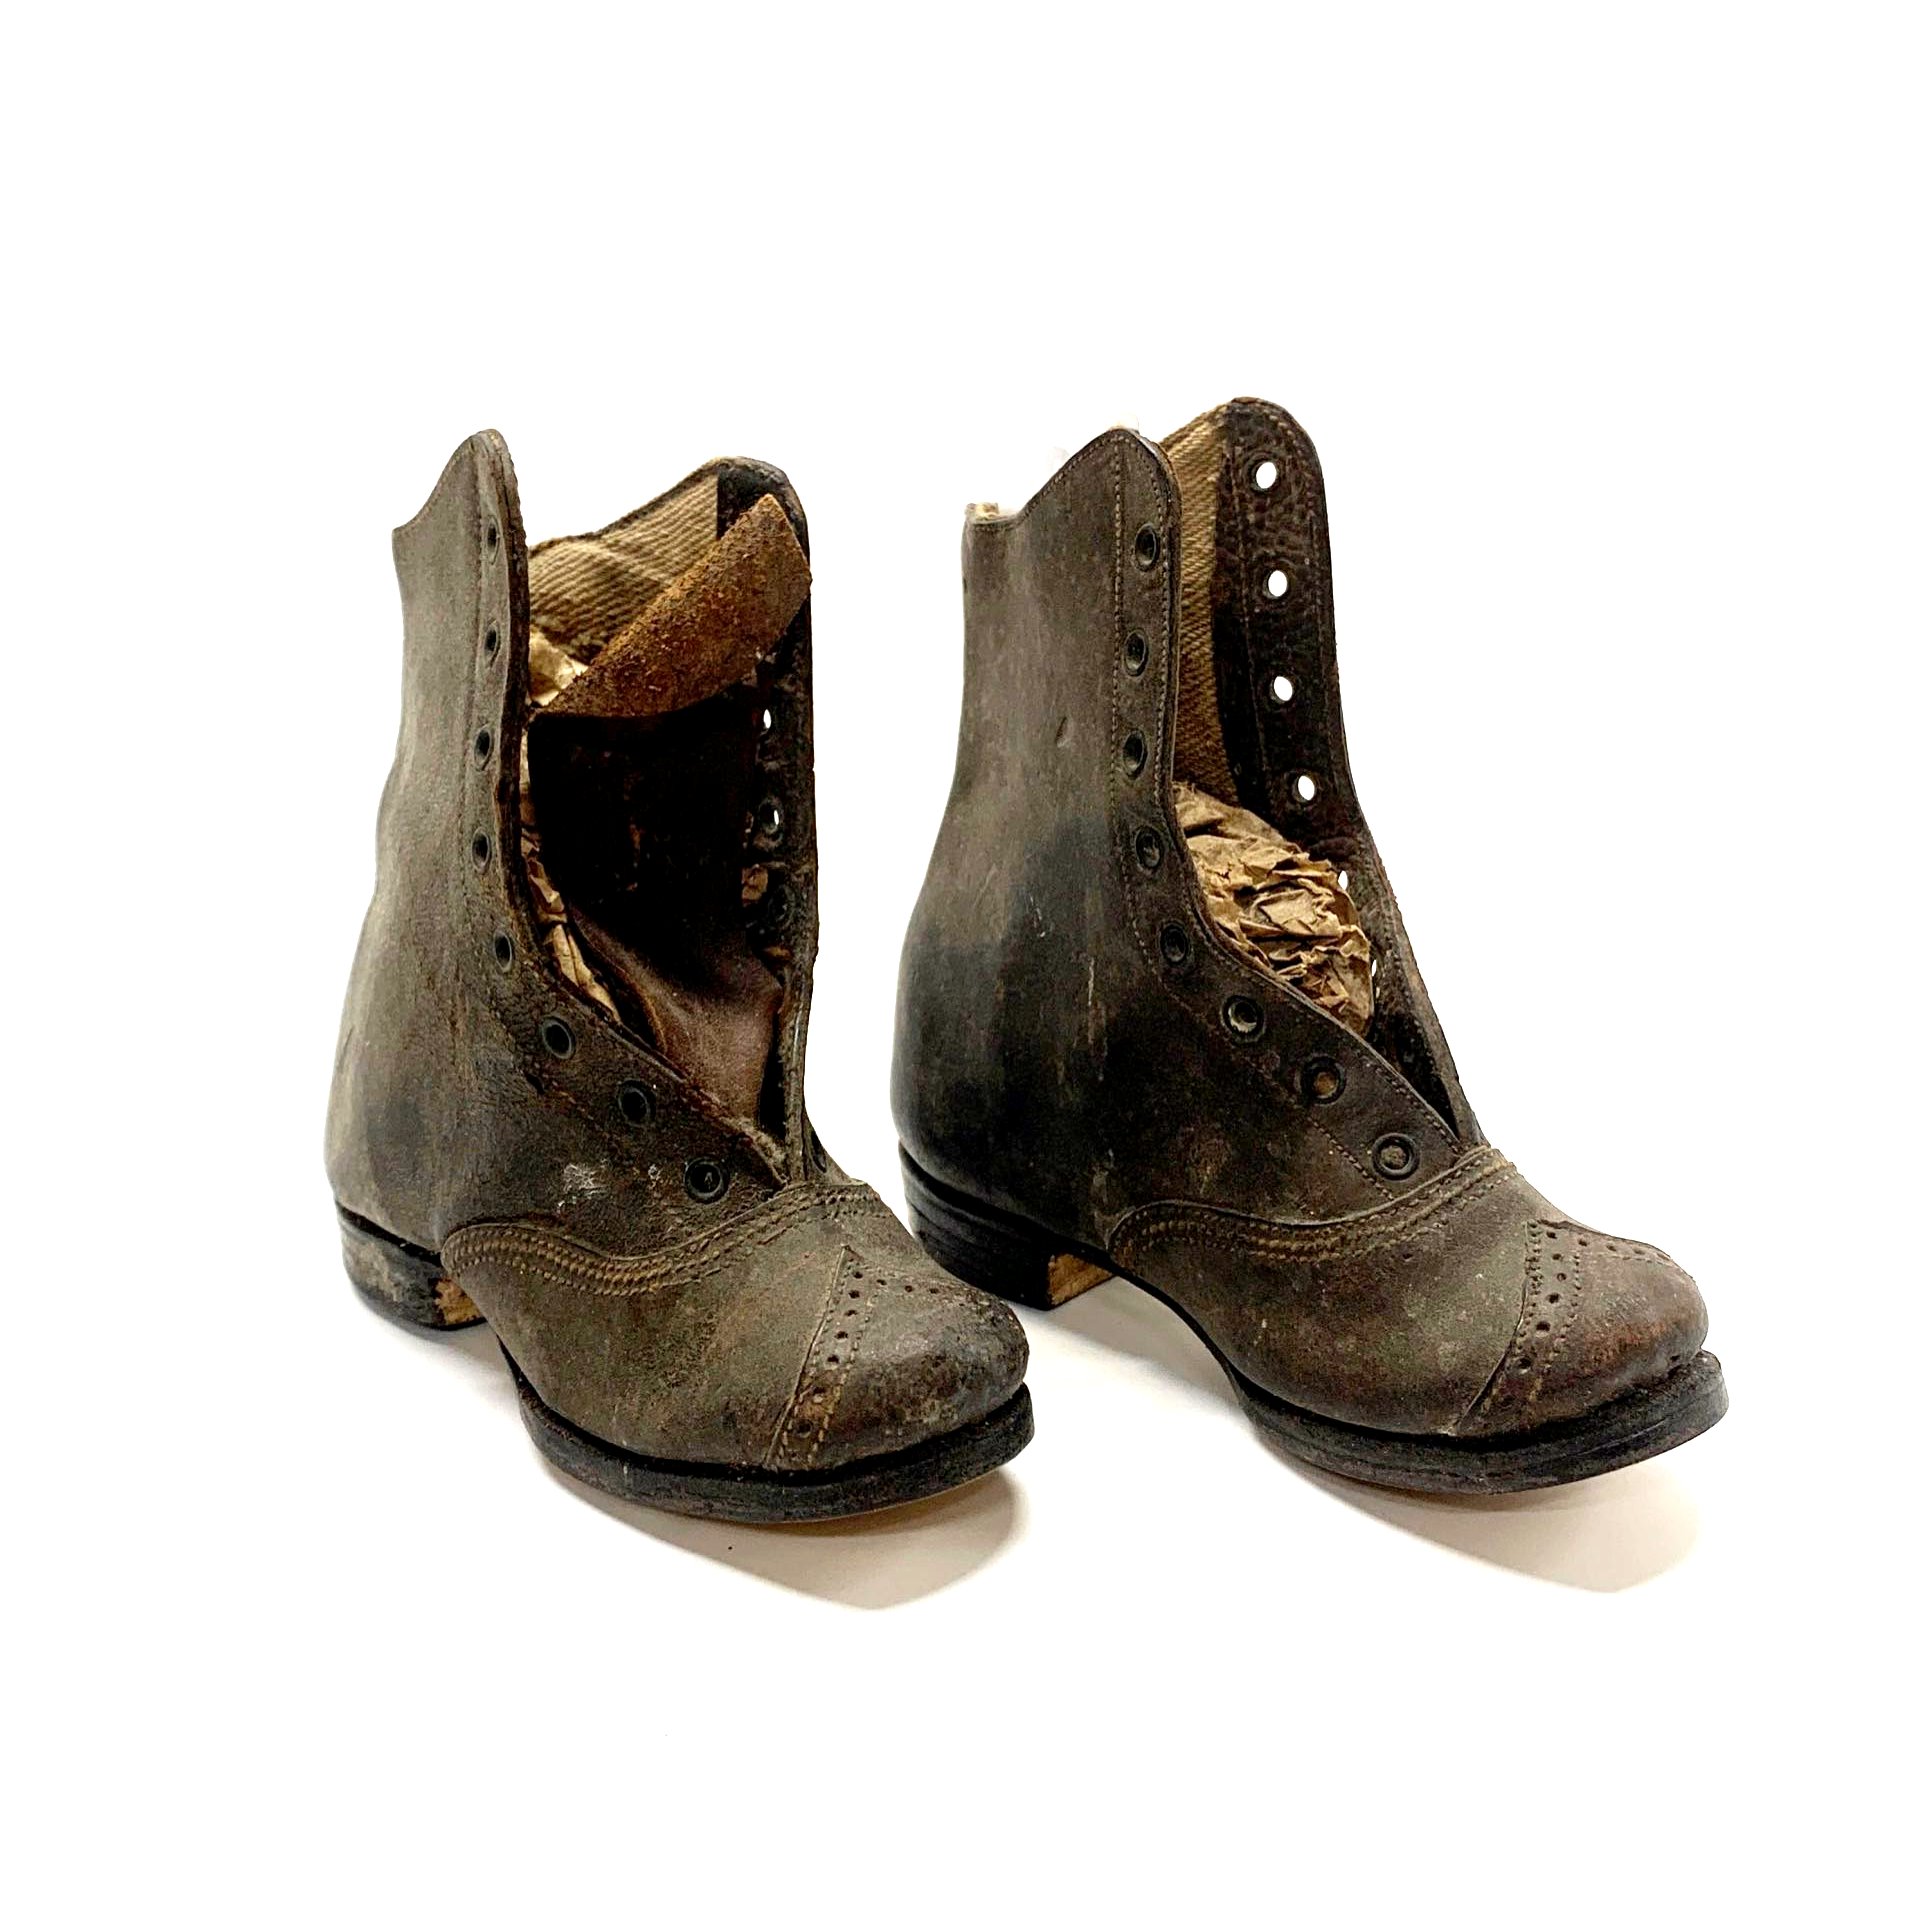 A pair of 19th century handmade girl's leather boots, H. 13cm, L. 14cm.